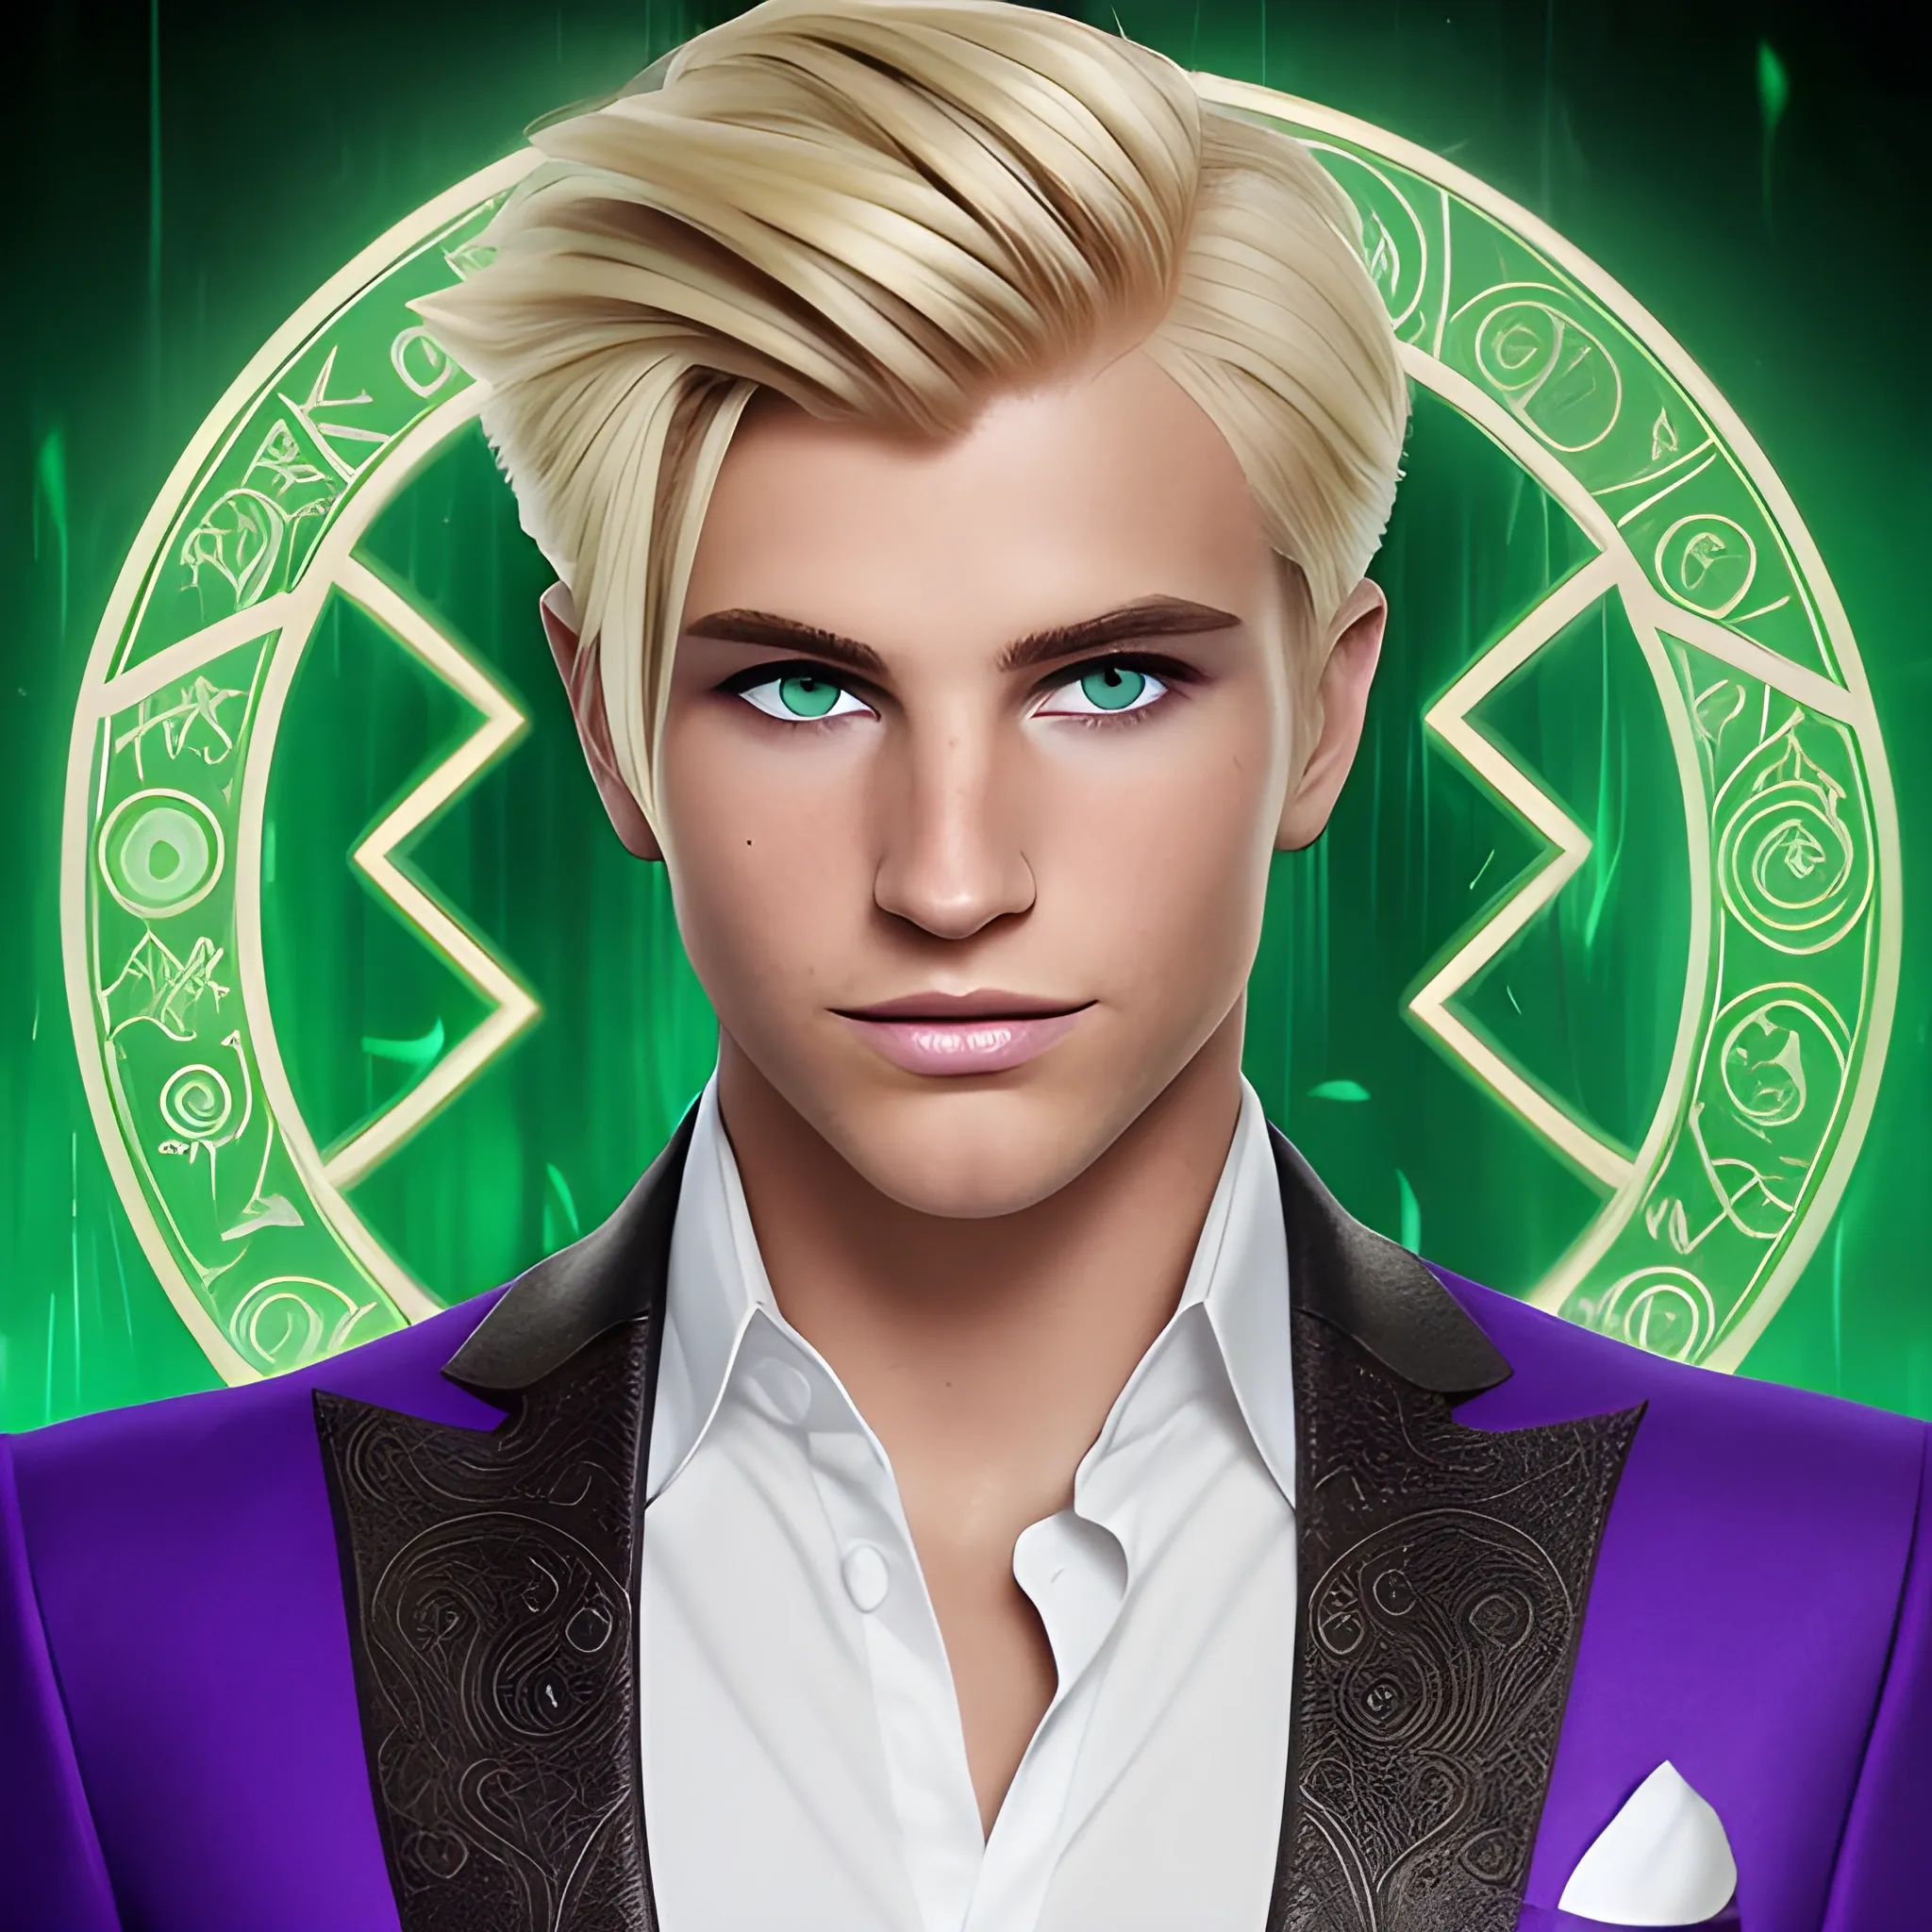 Short male with blond hair styled with a middle part, tanned skin. His eyes are emerald green, and is wearing a purple suit with white accents. He is looking at the camera. A cape that has different rune and glyphs etched into it. Each rune seems to glow softly.
Fantasy